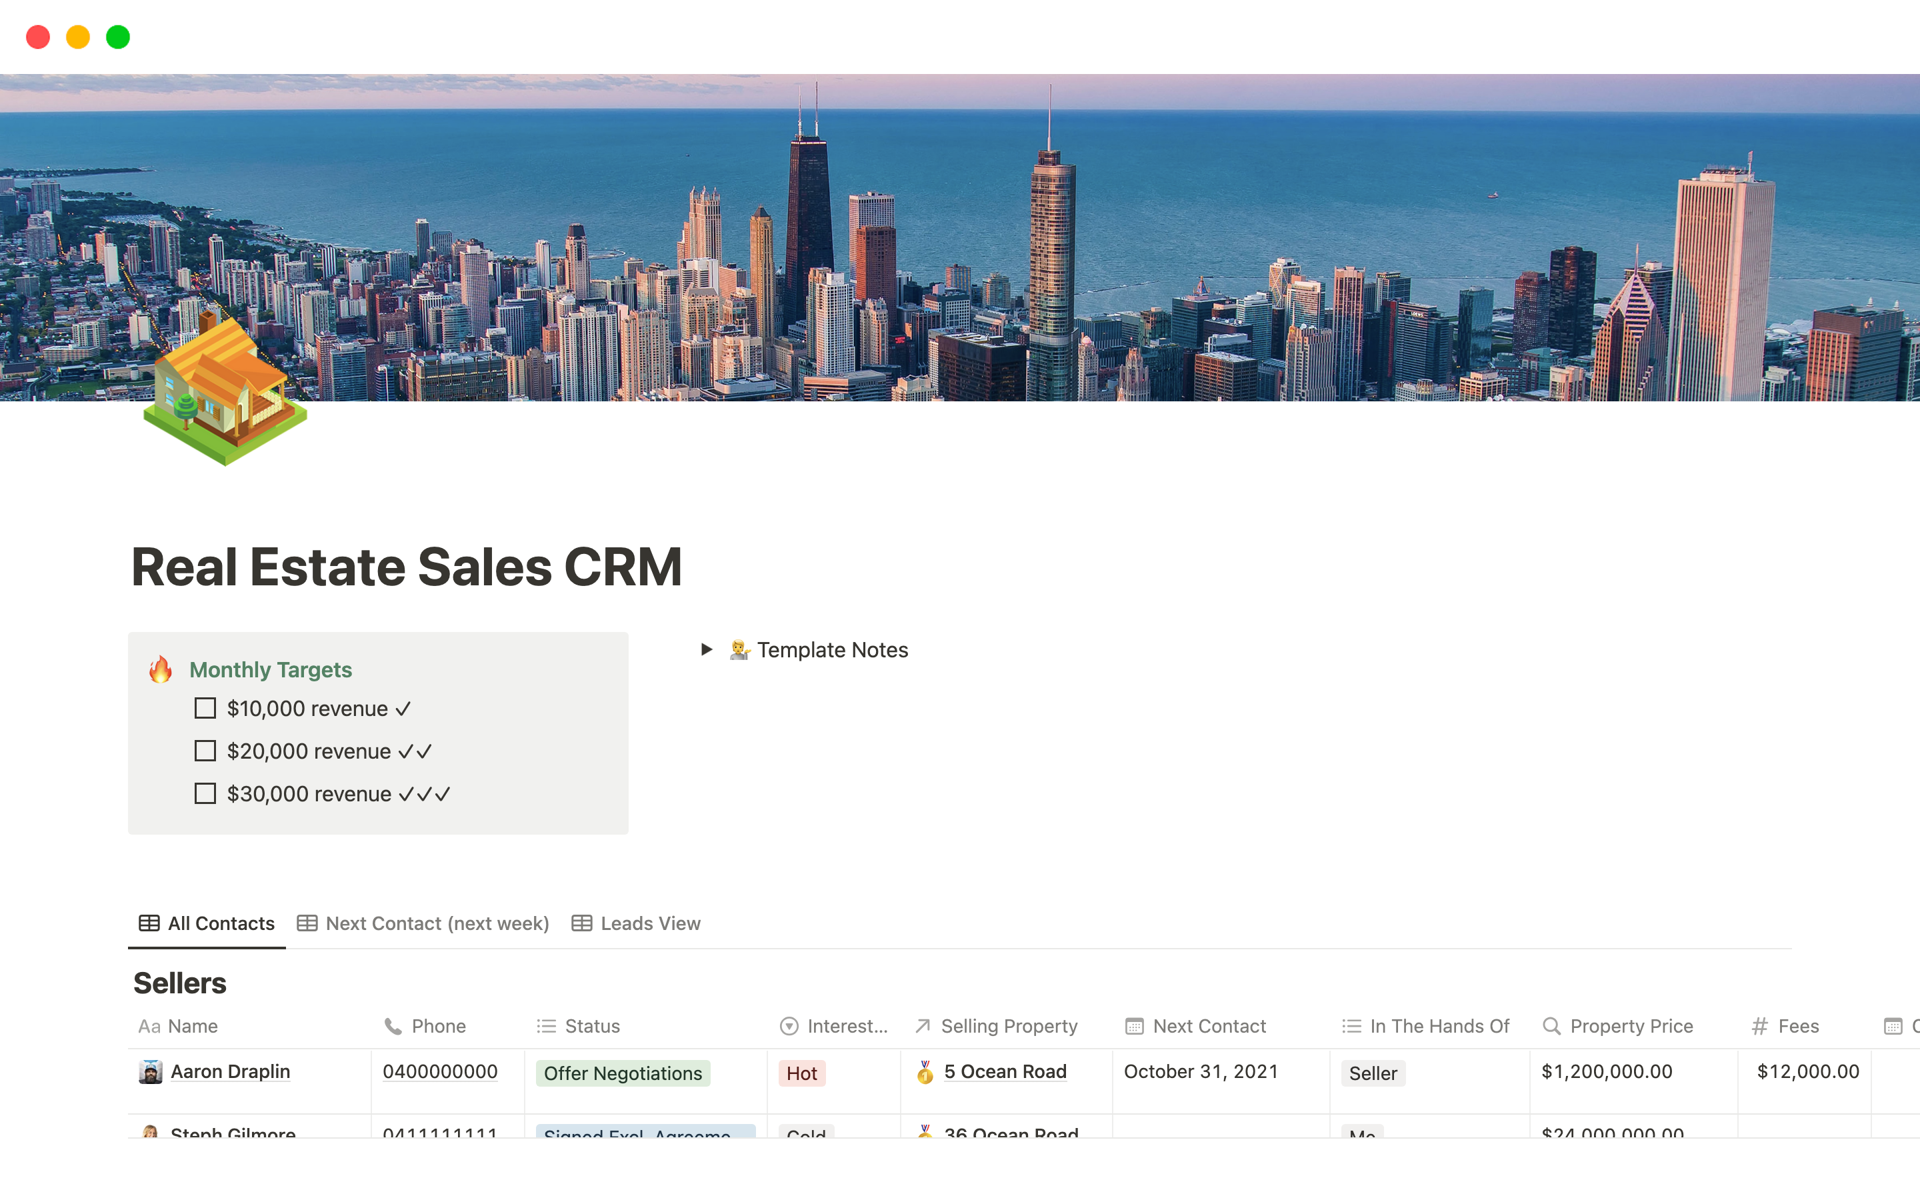 Using this template, you’ll be able to run the core part of your business (getting and managing customers) out of Notion and you’ll know your CRM is set up properly to grow with your business.